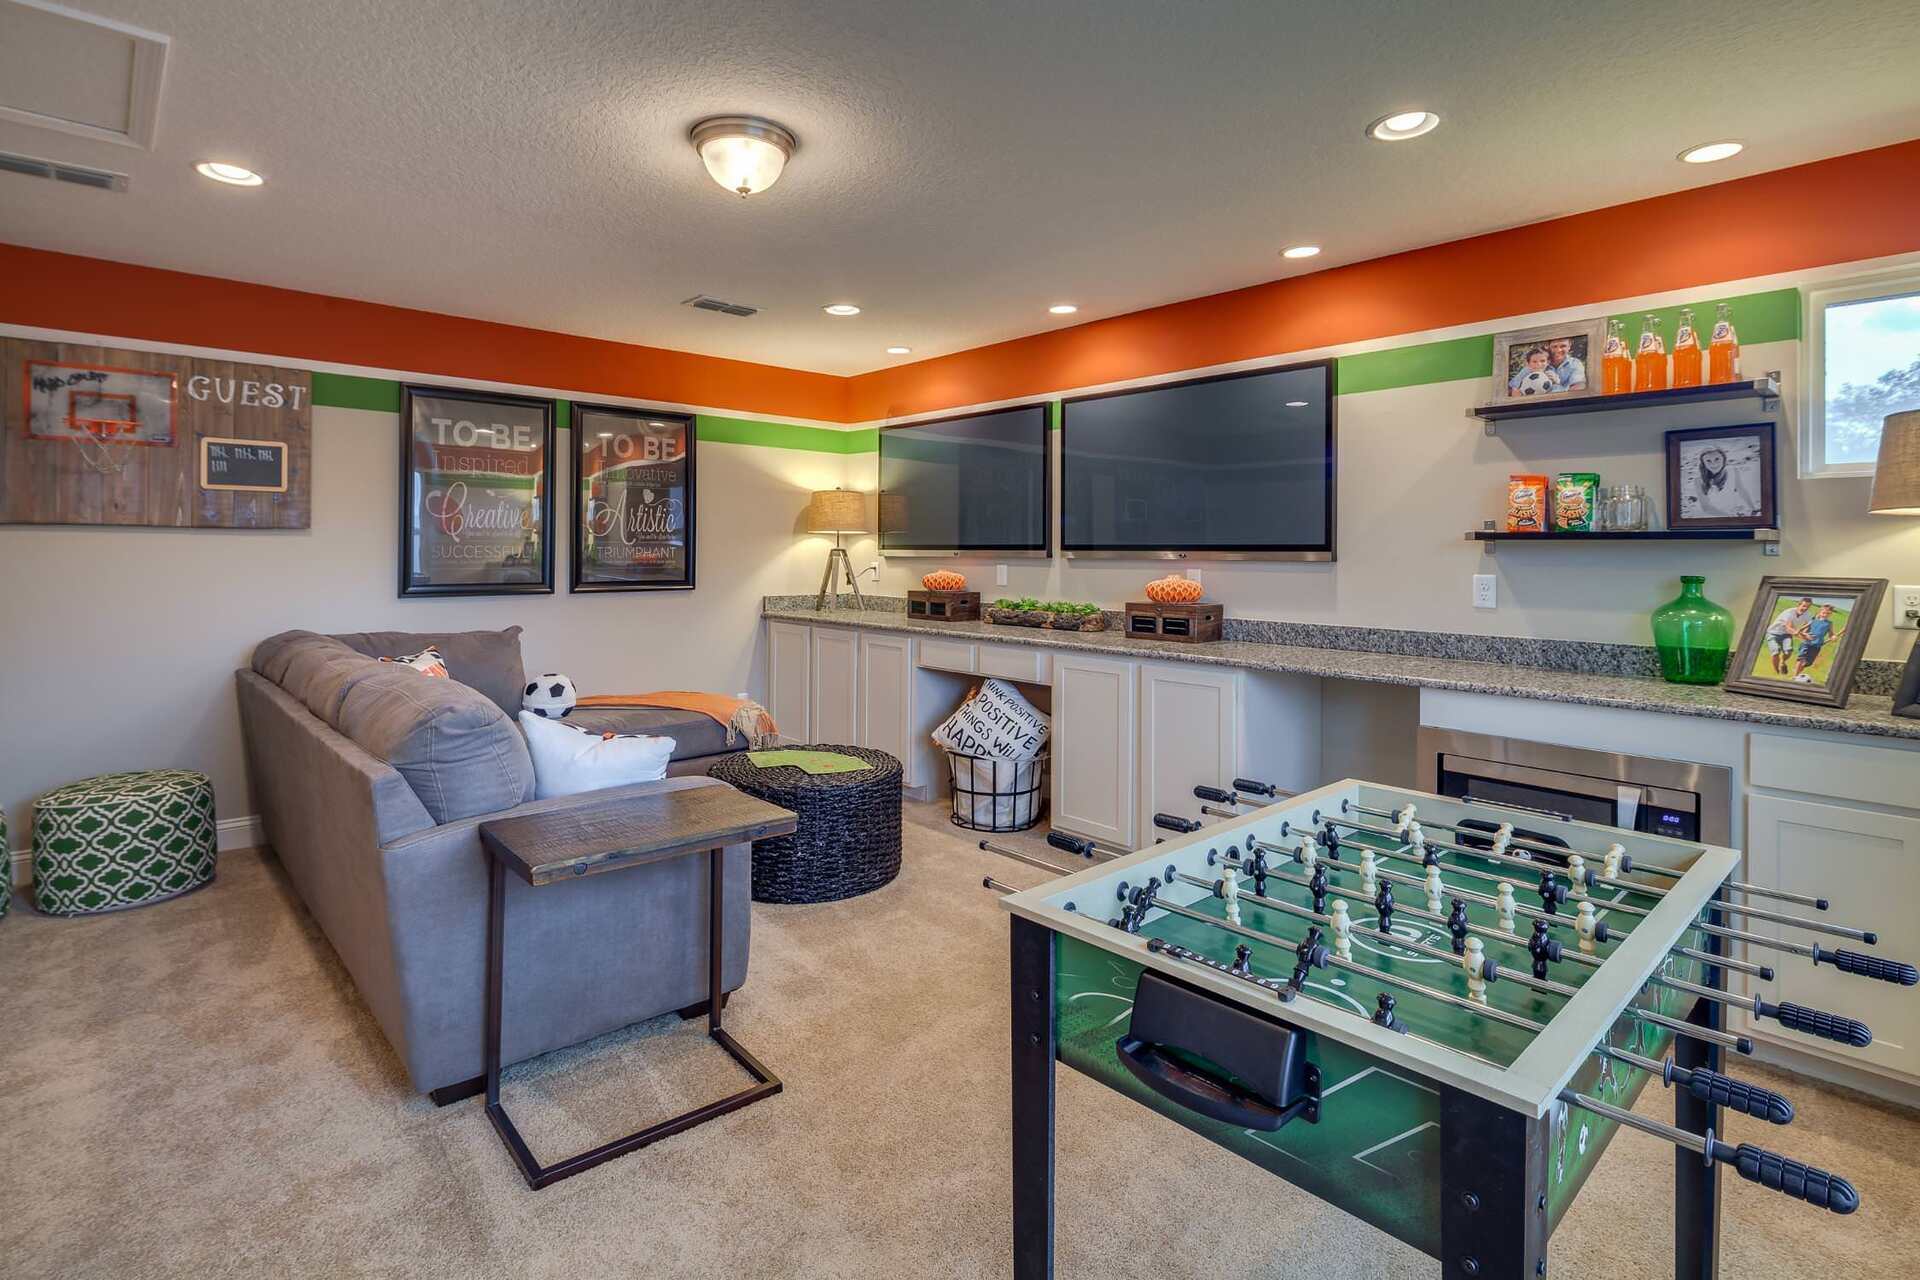 Basement Games Room Ideas: 7 Looks For Family Nights In